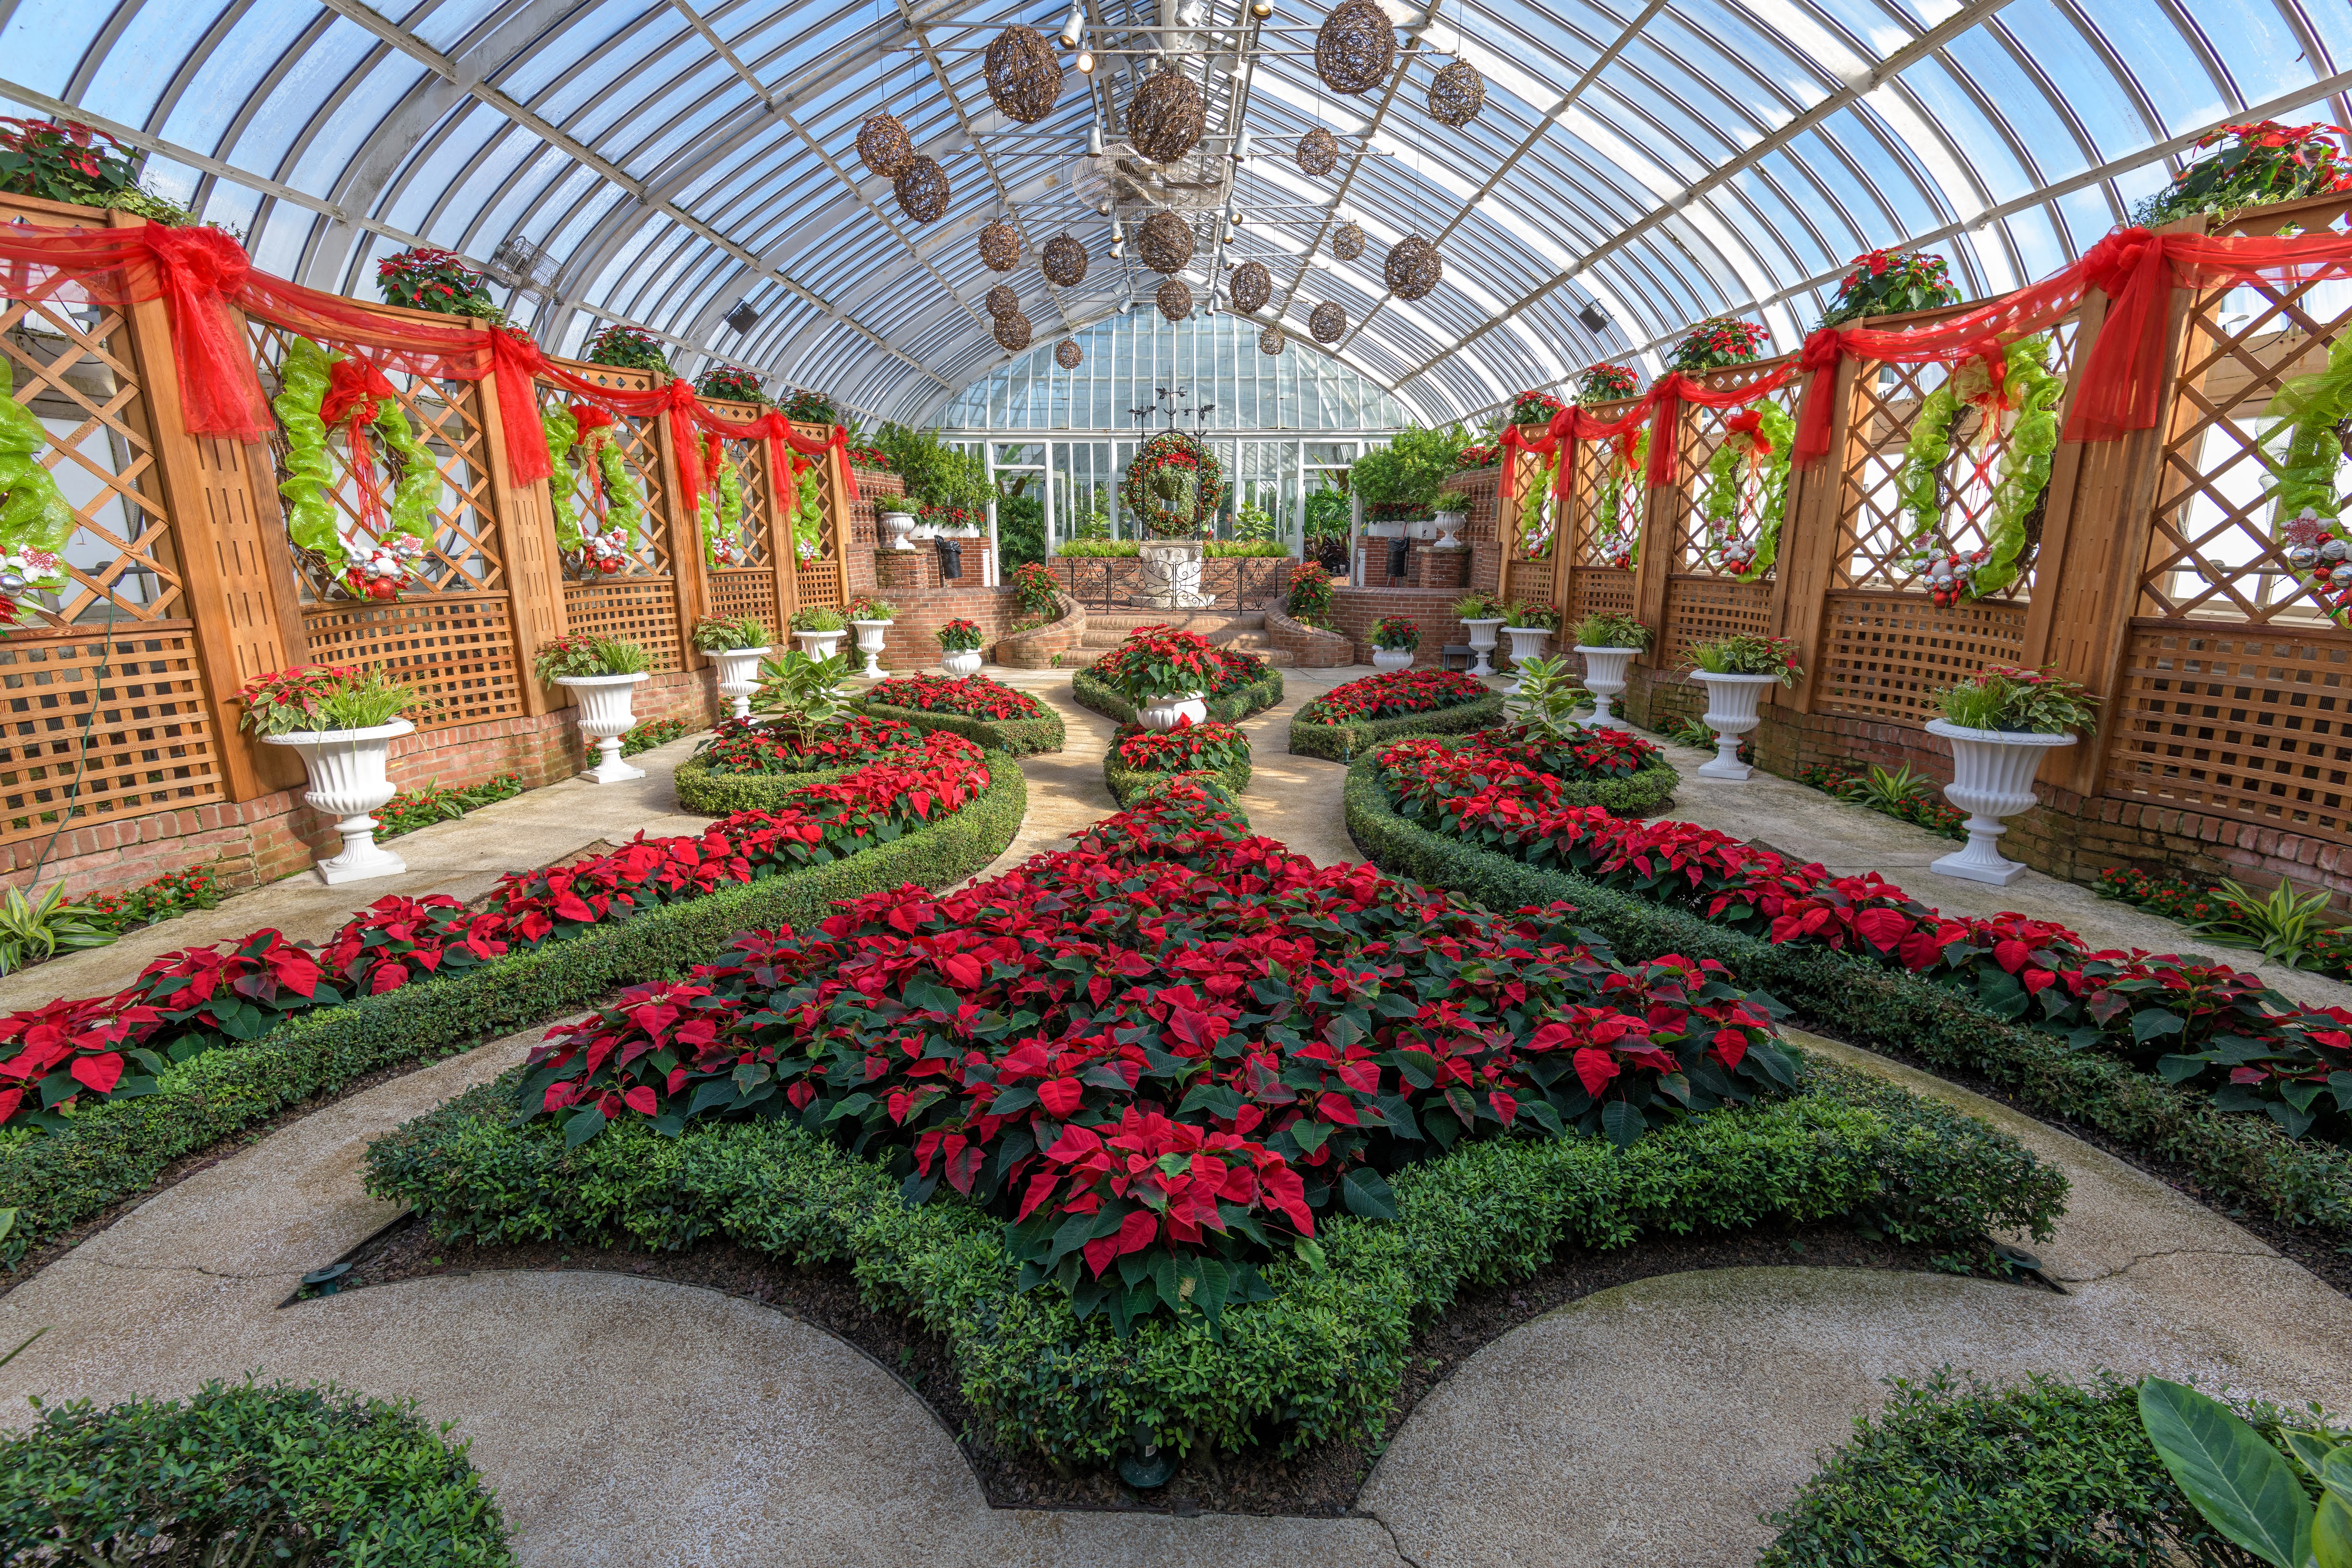 Winter Flower Show: Home for the Holidays